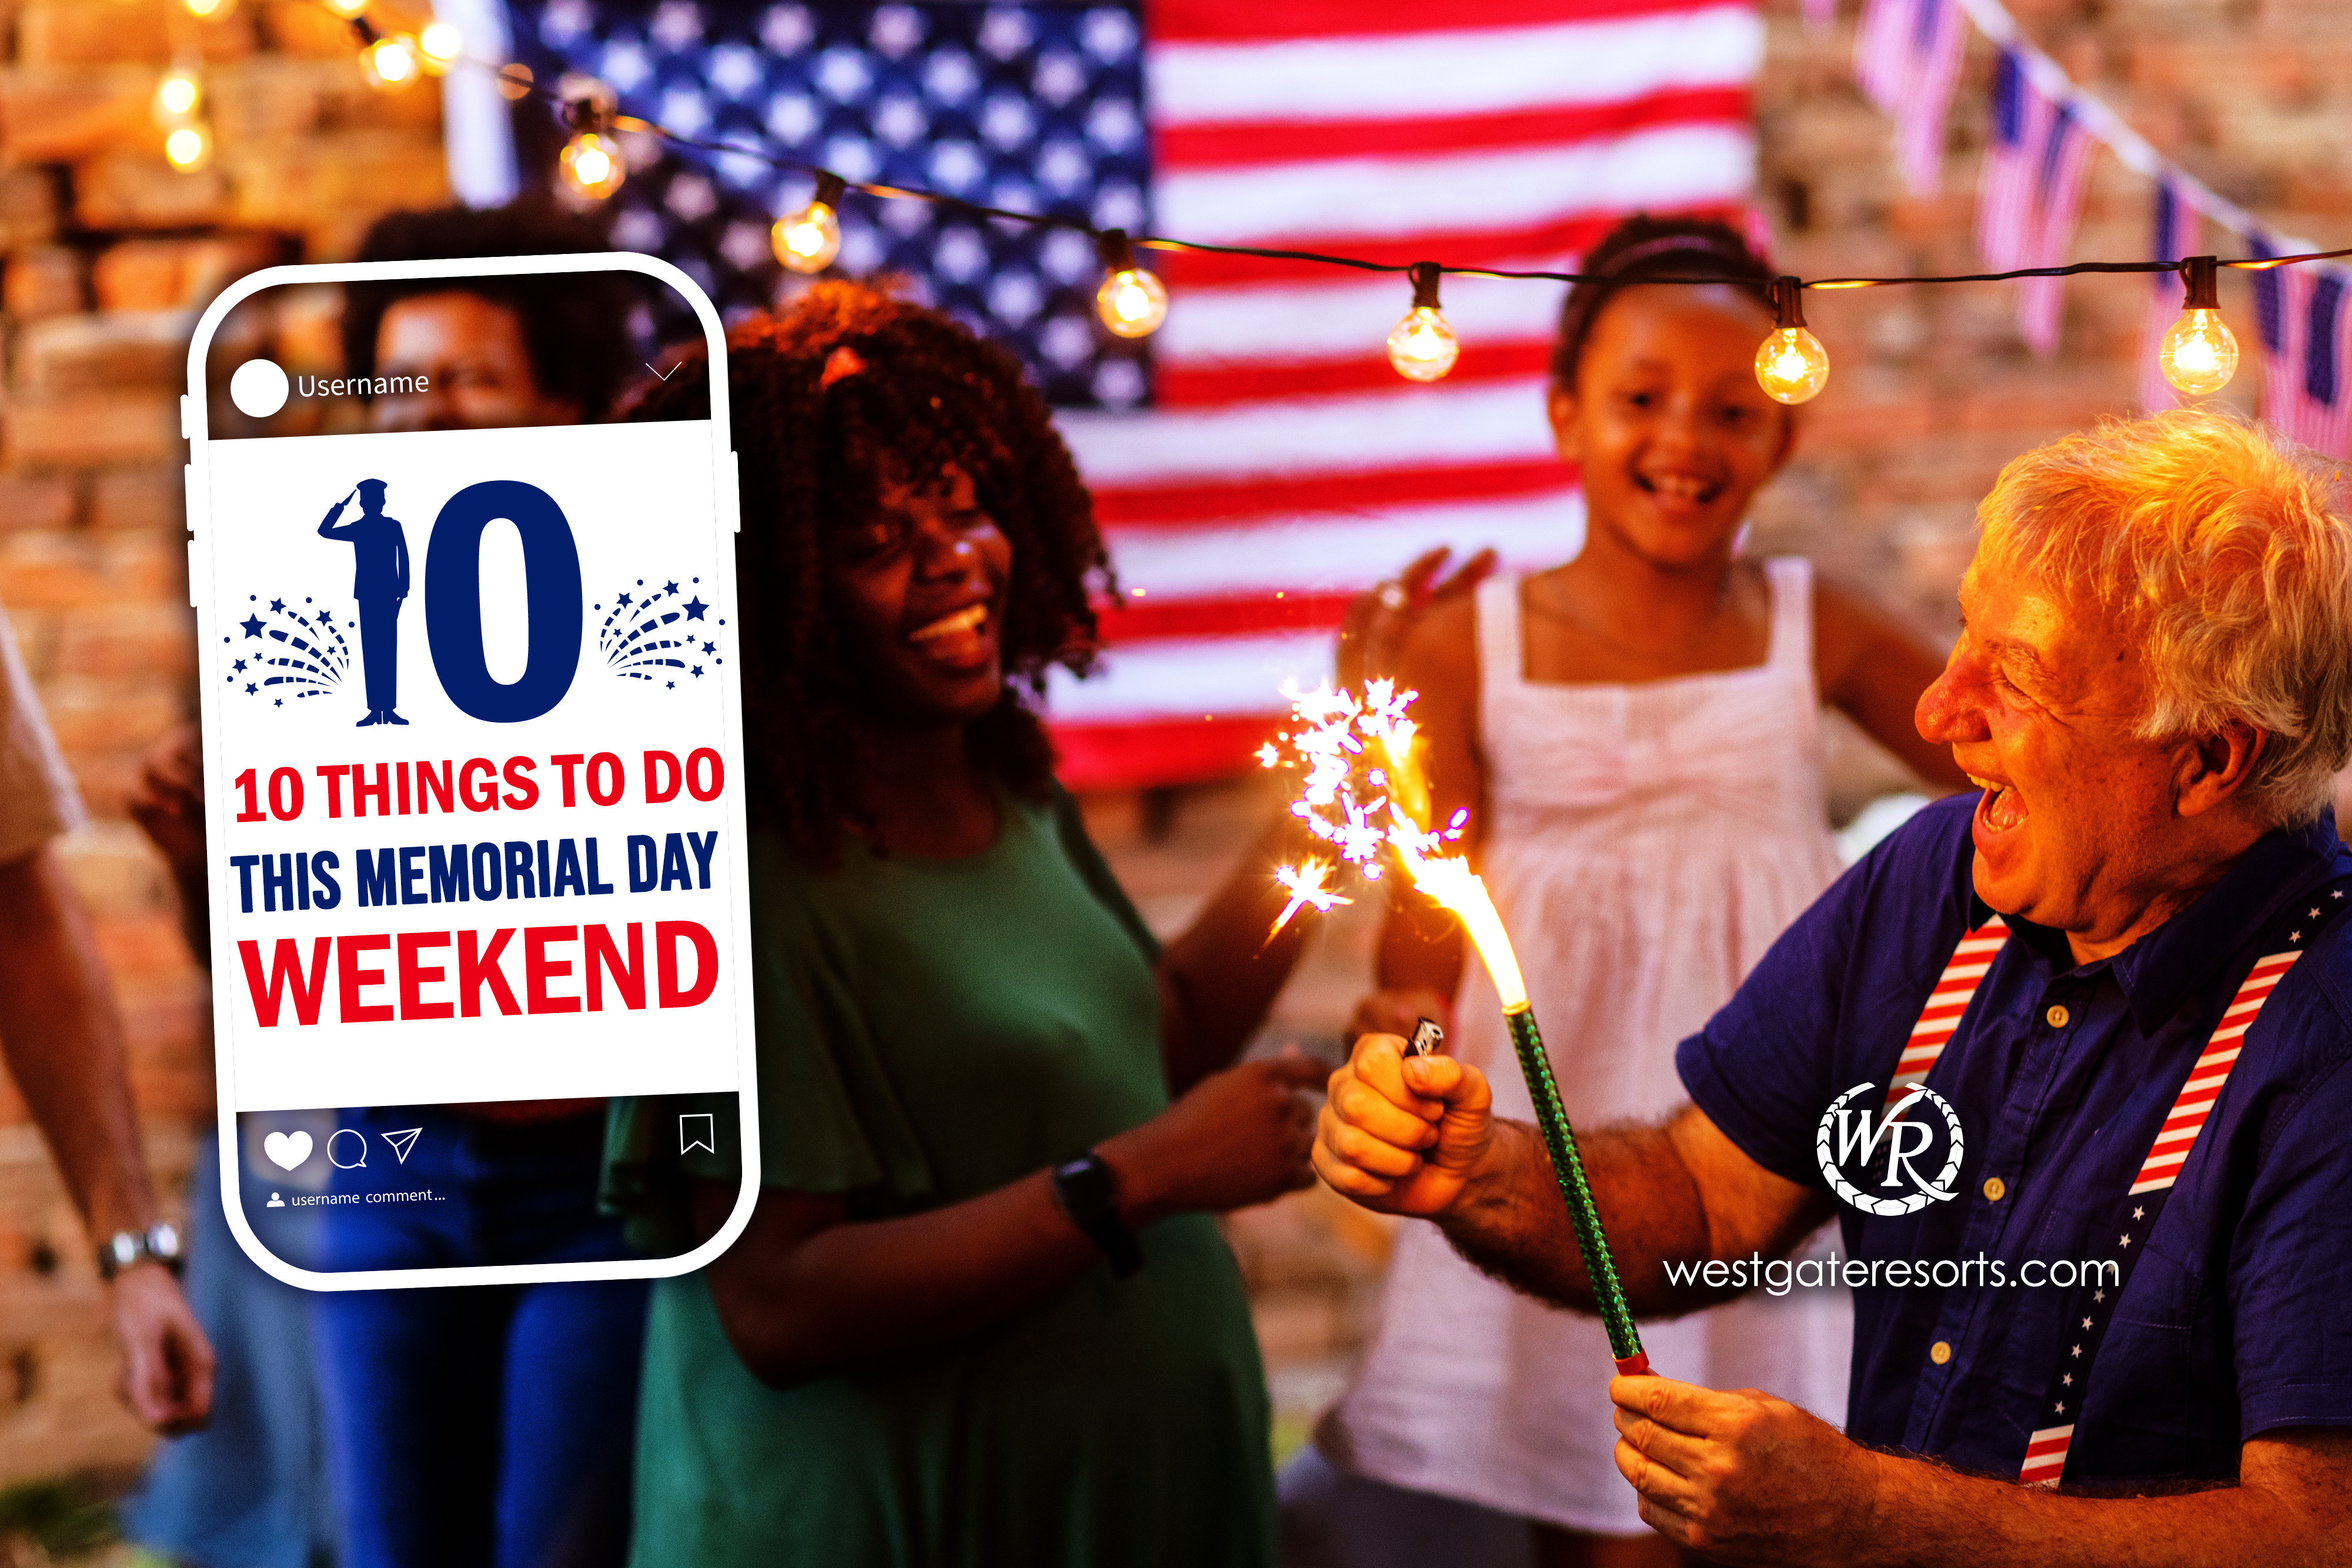 10 Things to do this Memorial Day Weekend